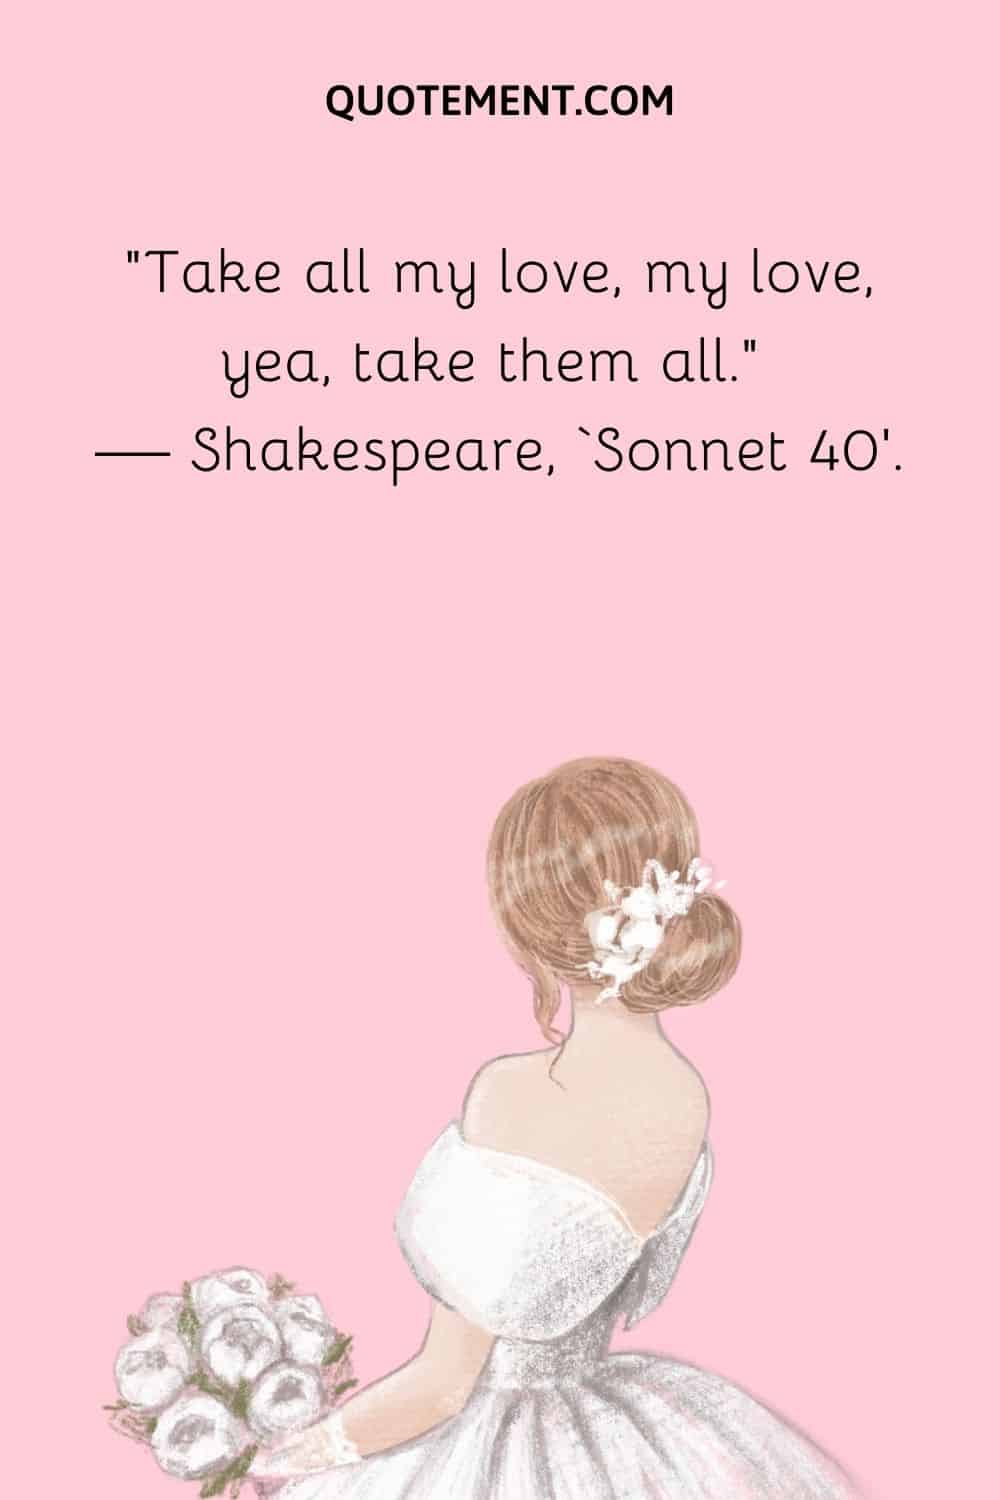 Take all my love, my love, yea, take them all. — Shakespeare, ‘Sonnet 40’.